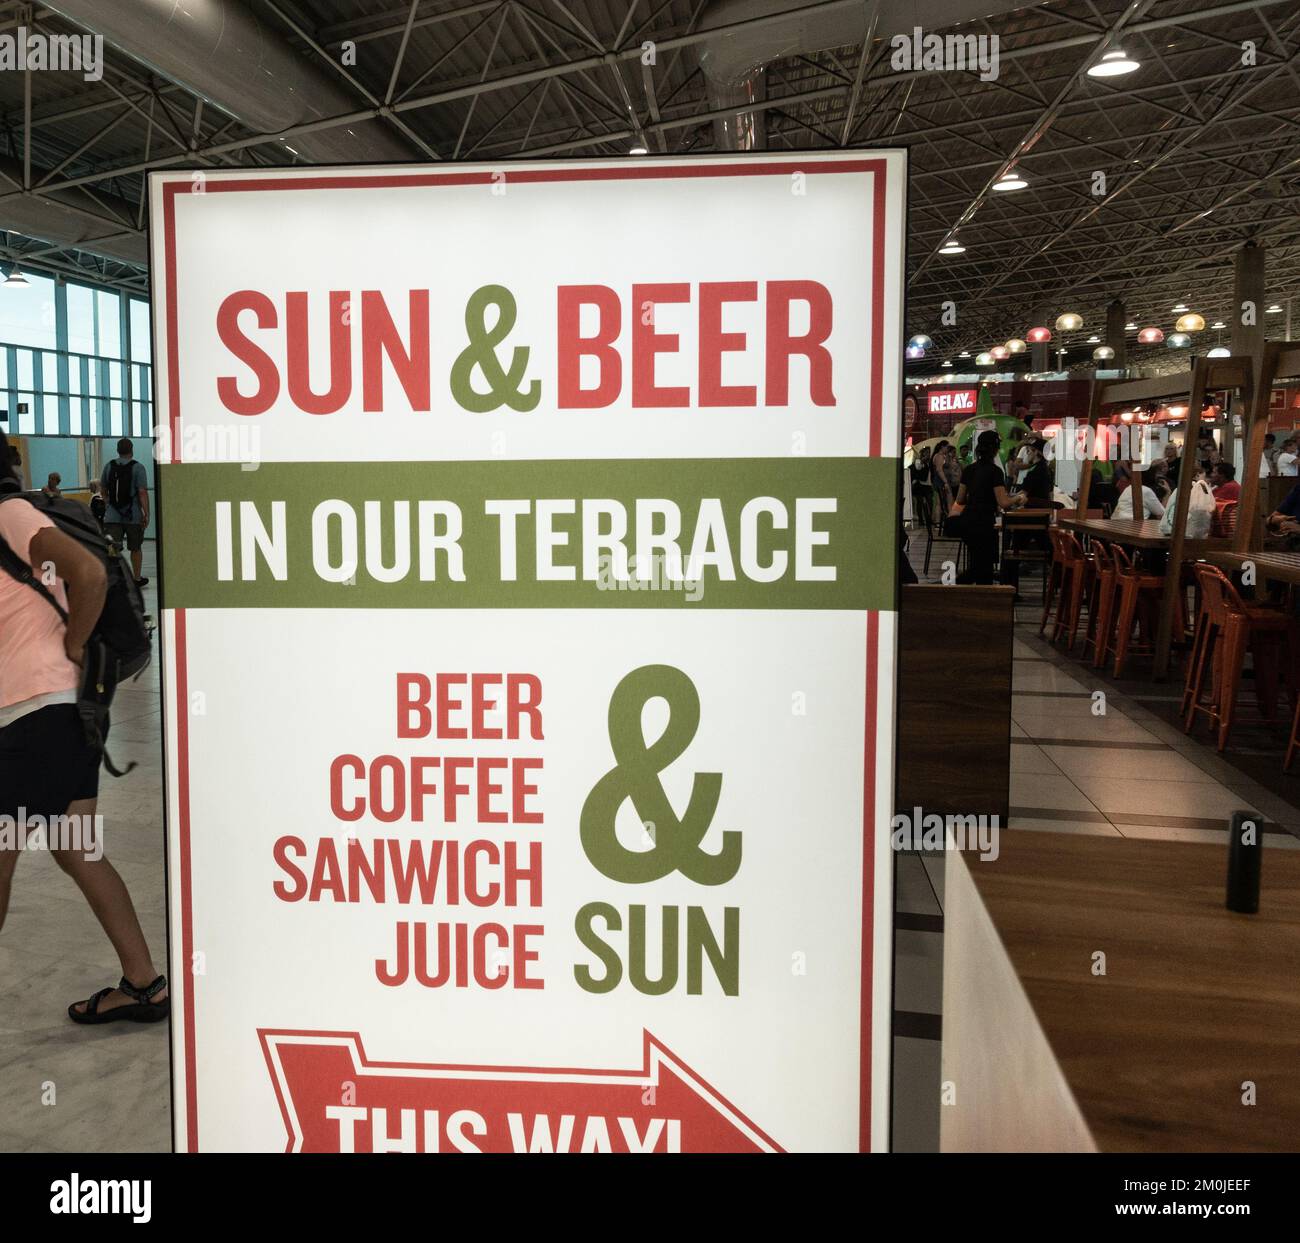 Airport departure lounge bar sign in Spain Stock Photo